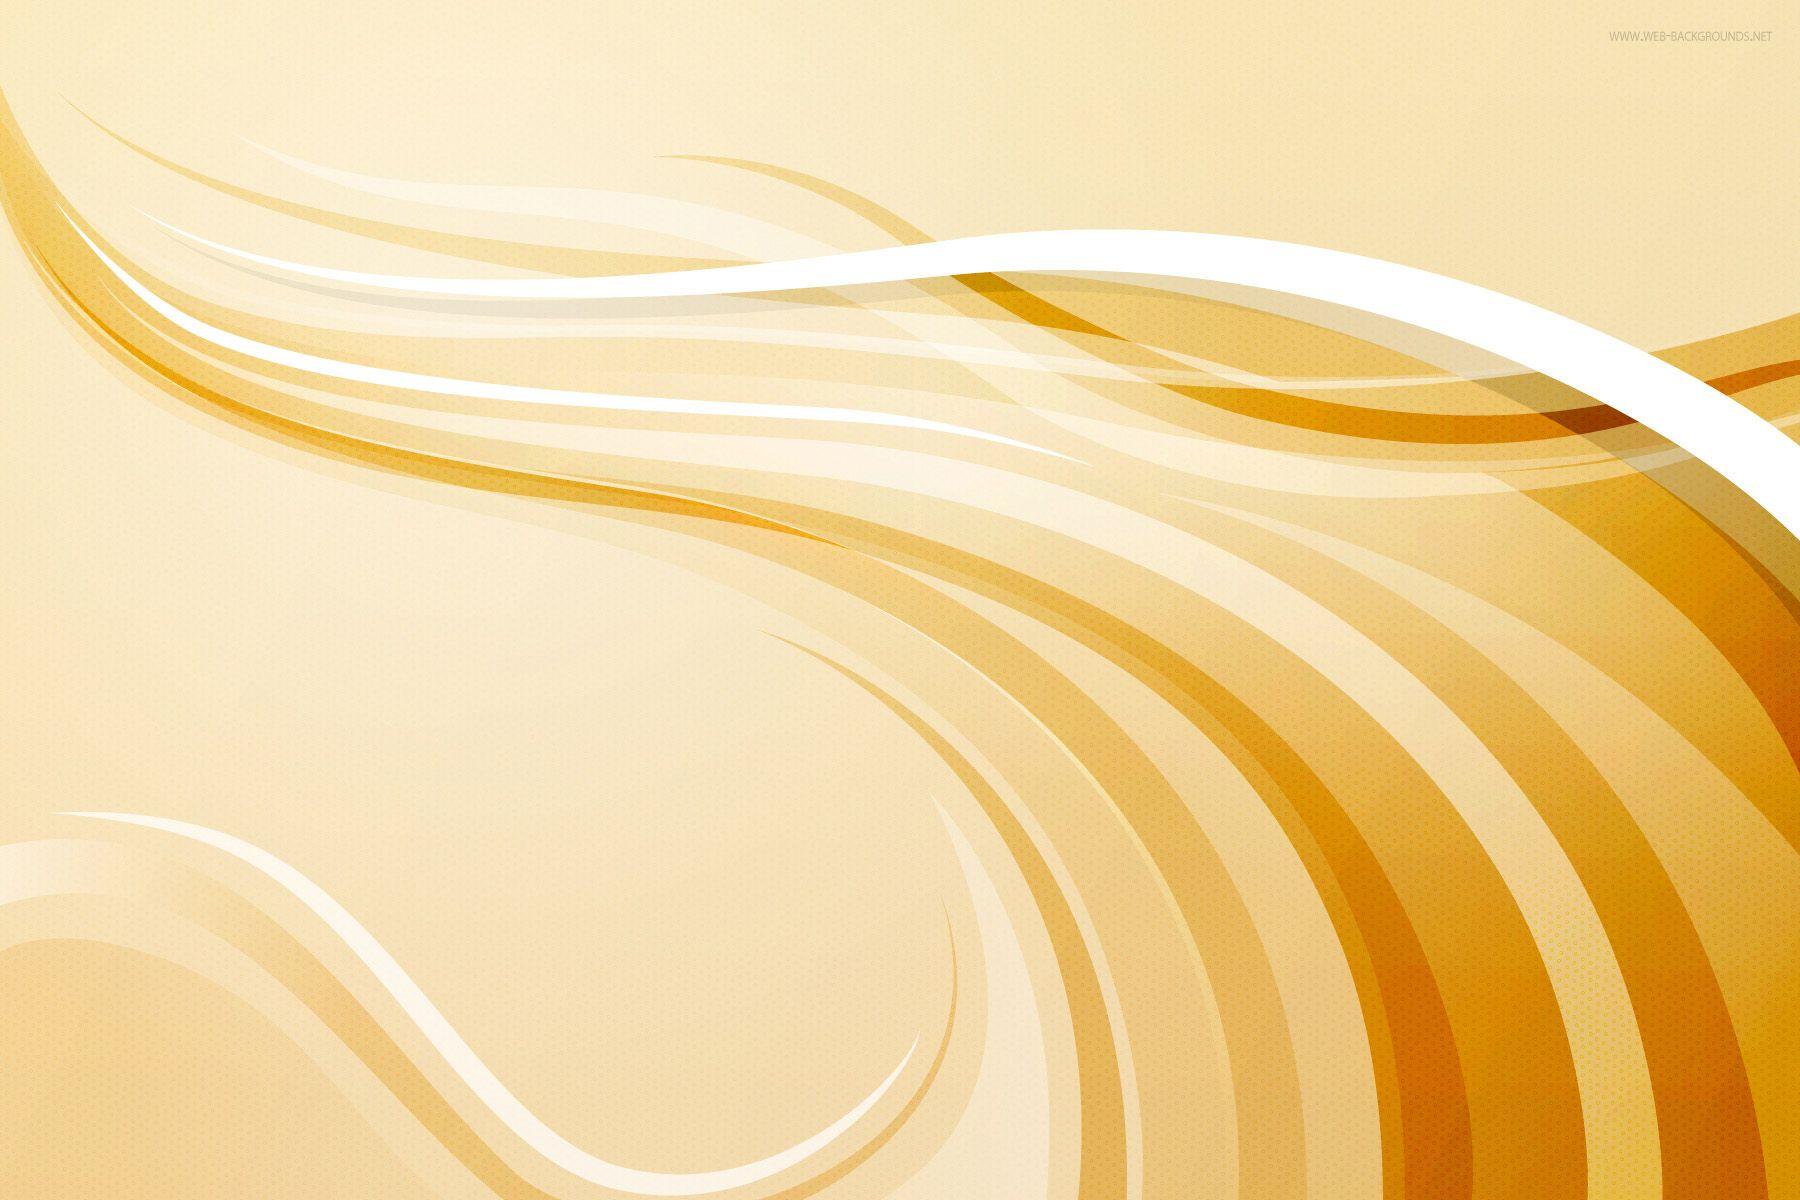 Ivory and Gold Desktop Wallpapers - Top Free Ivory and Gold Desktop ...